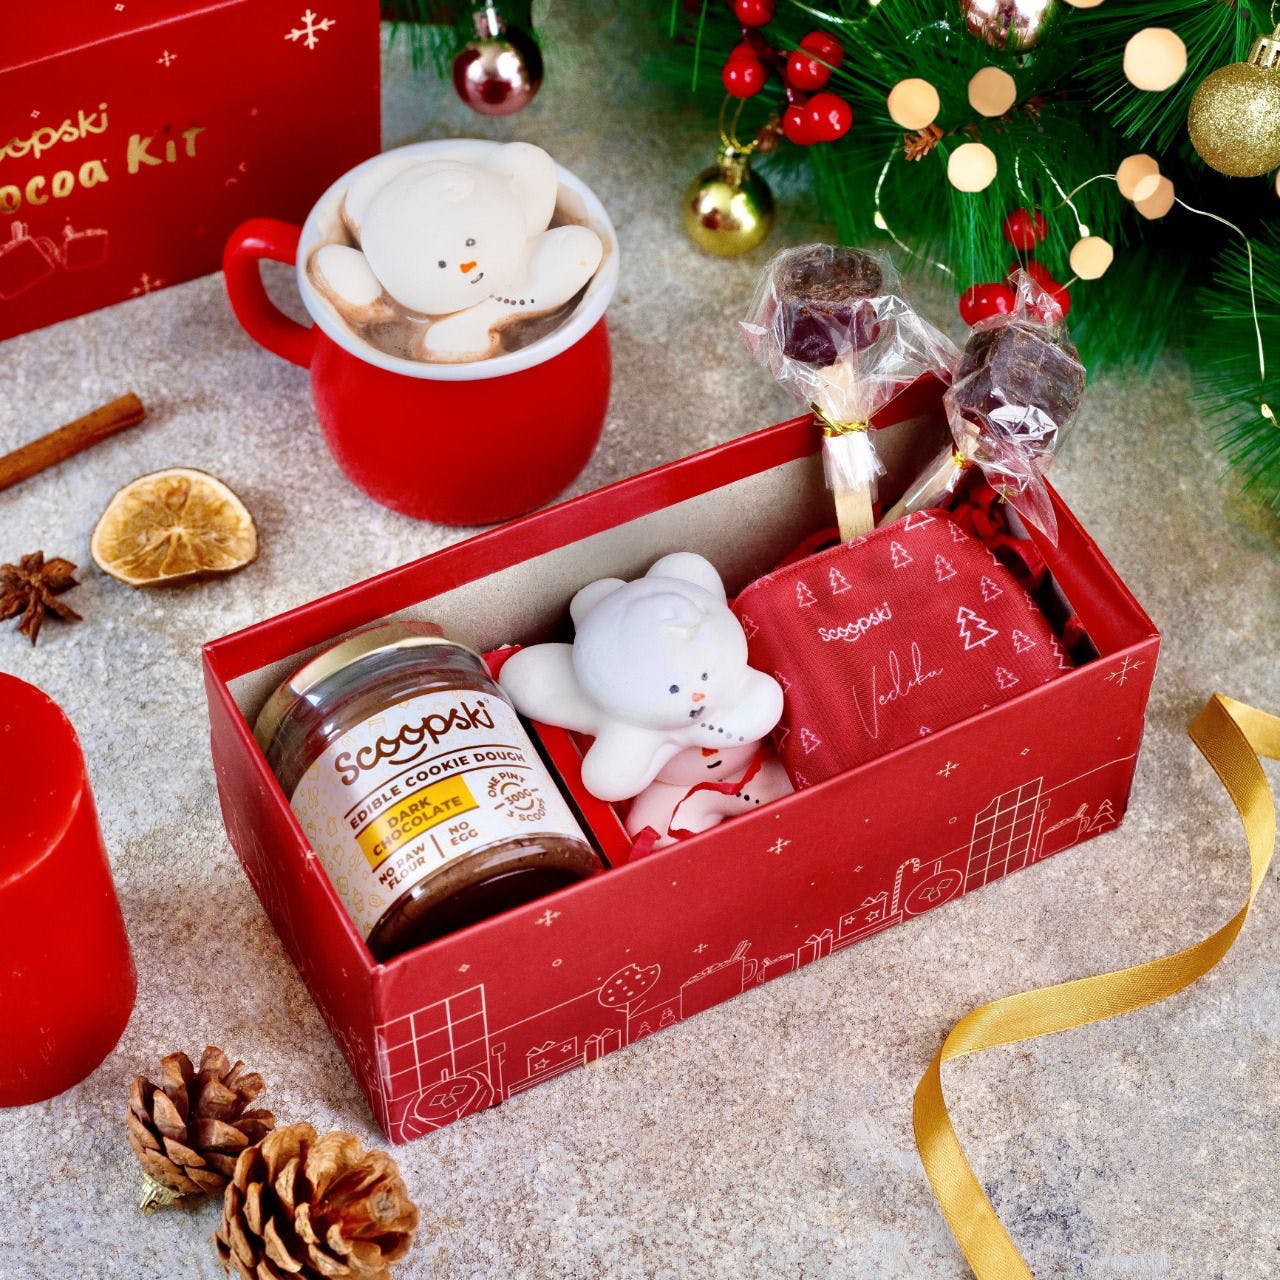 Red,Material property,Christmas ornament,Event,Serveware,Dishware,Ingredient,Christmas decoration,Box,Cuisine